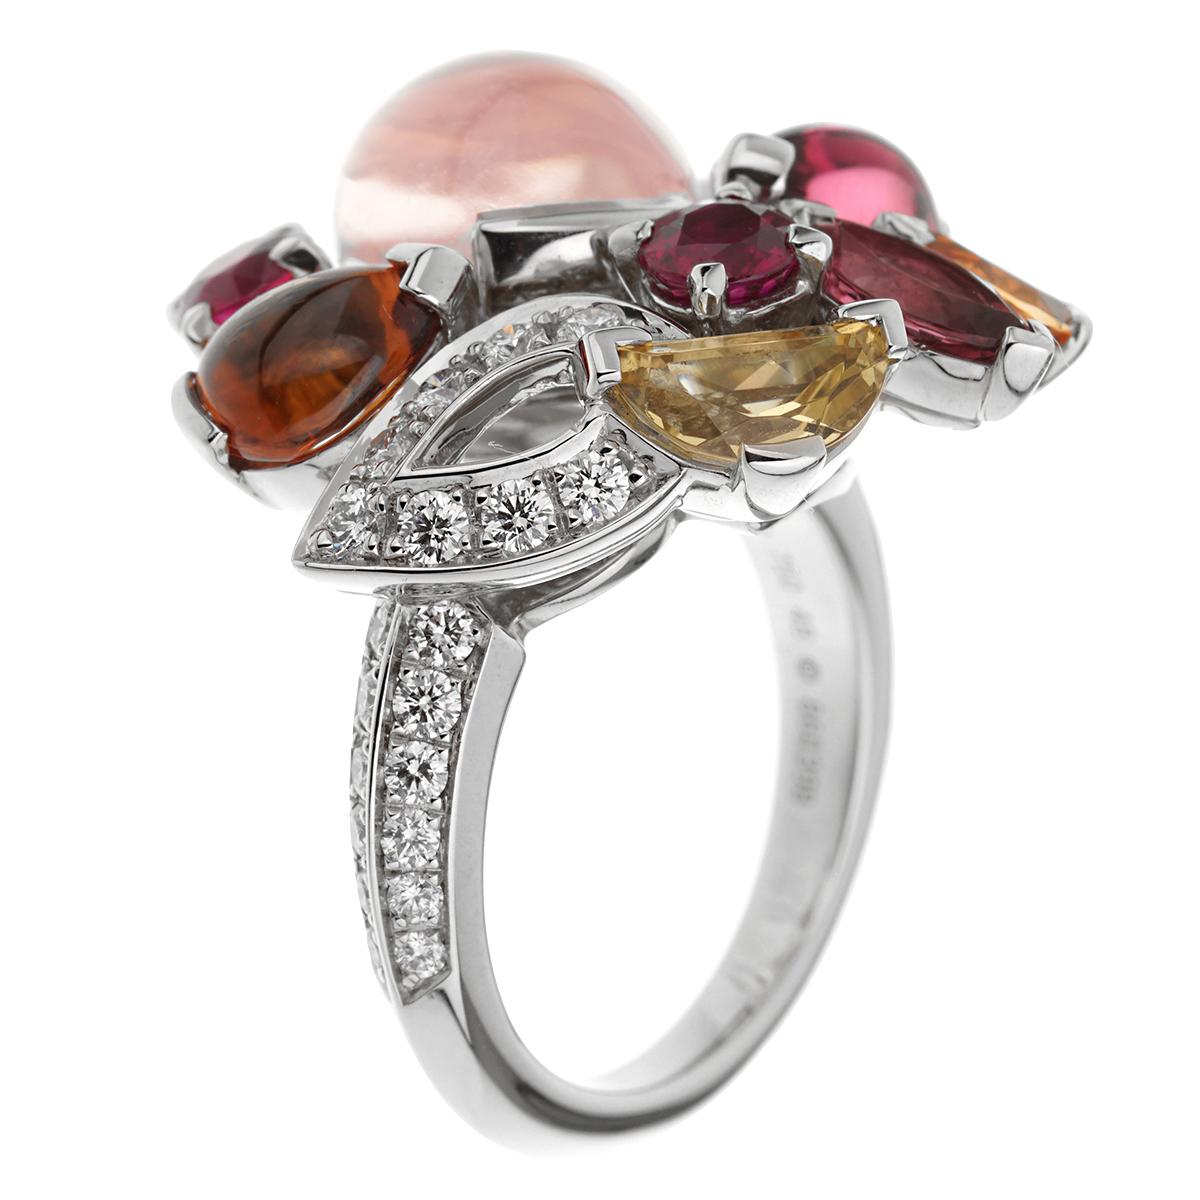 A fabulous Cartier cocktail ring showcasing pear-shaped rose quartz accented by rubies, yellow sapphires, pink tourmalines, orange garnets and tiny round diamonds, mounted in 18k white gold, signed Cartier and numbered. The ring measures a size 4